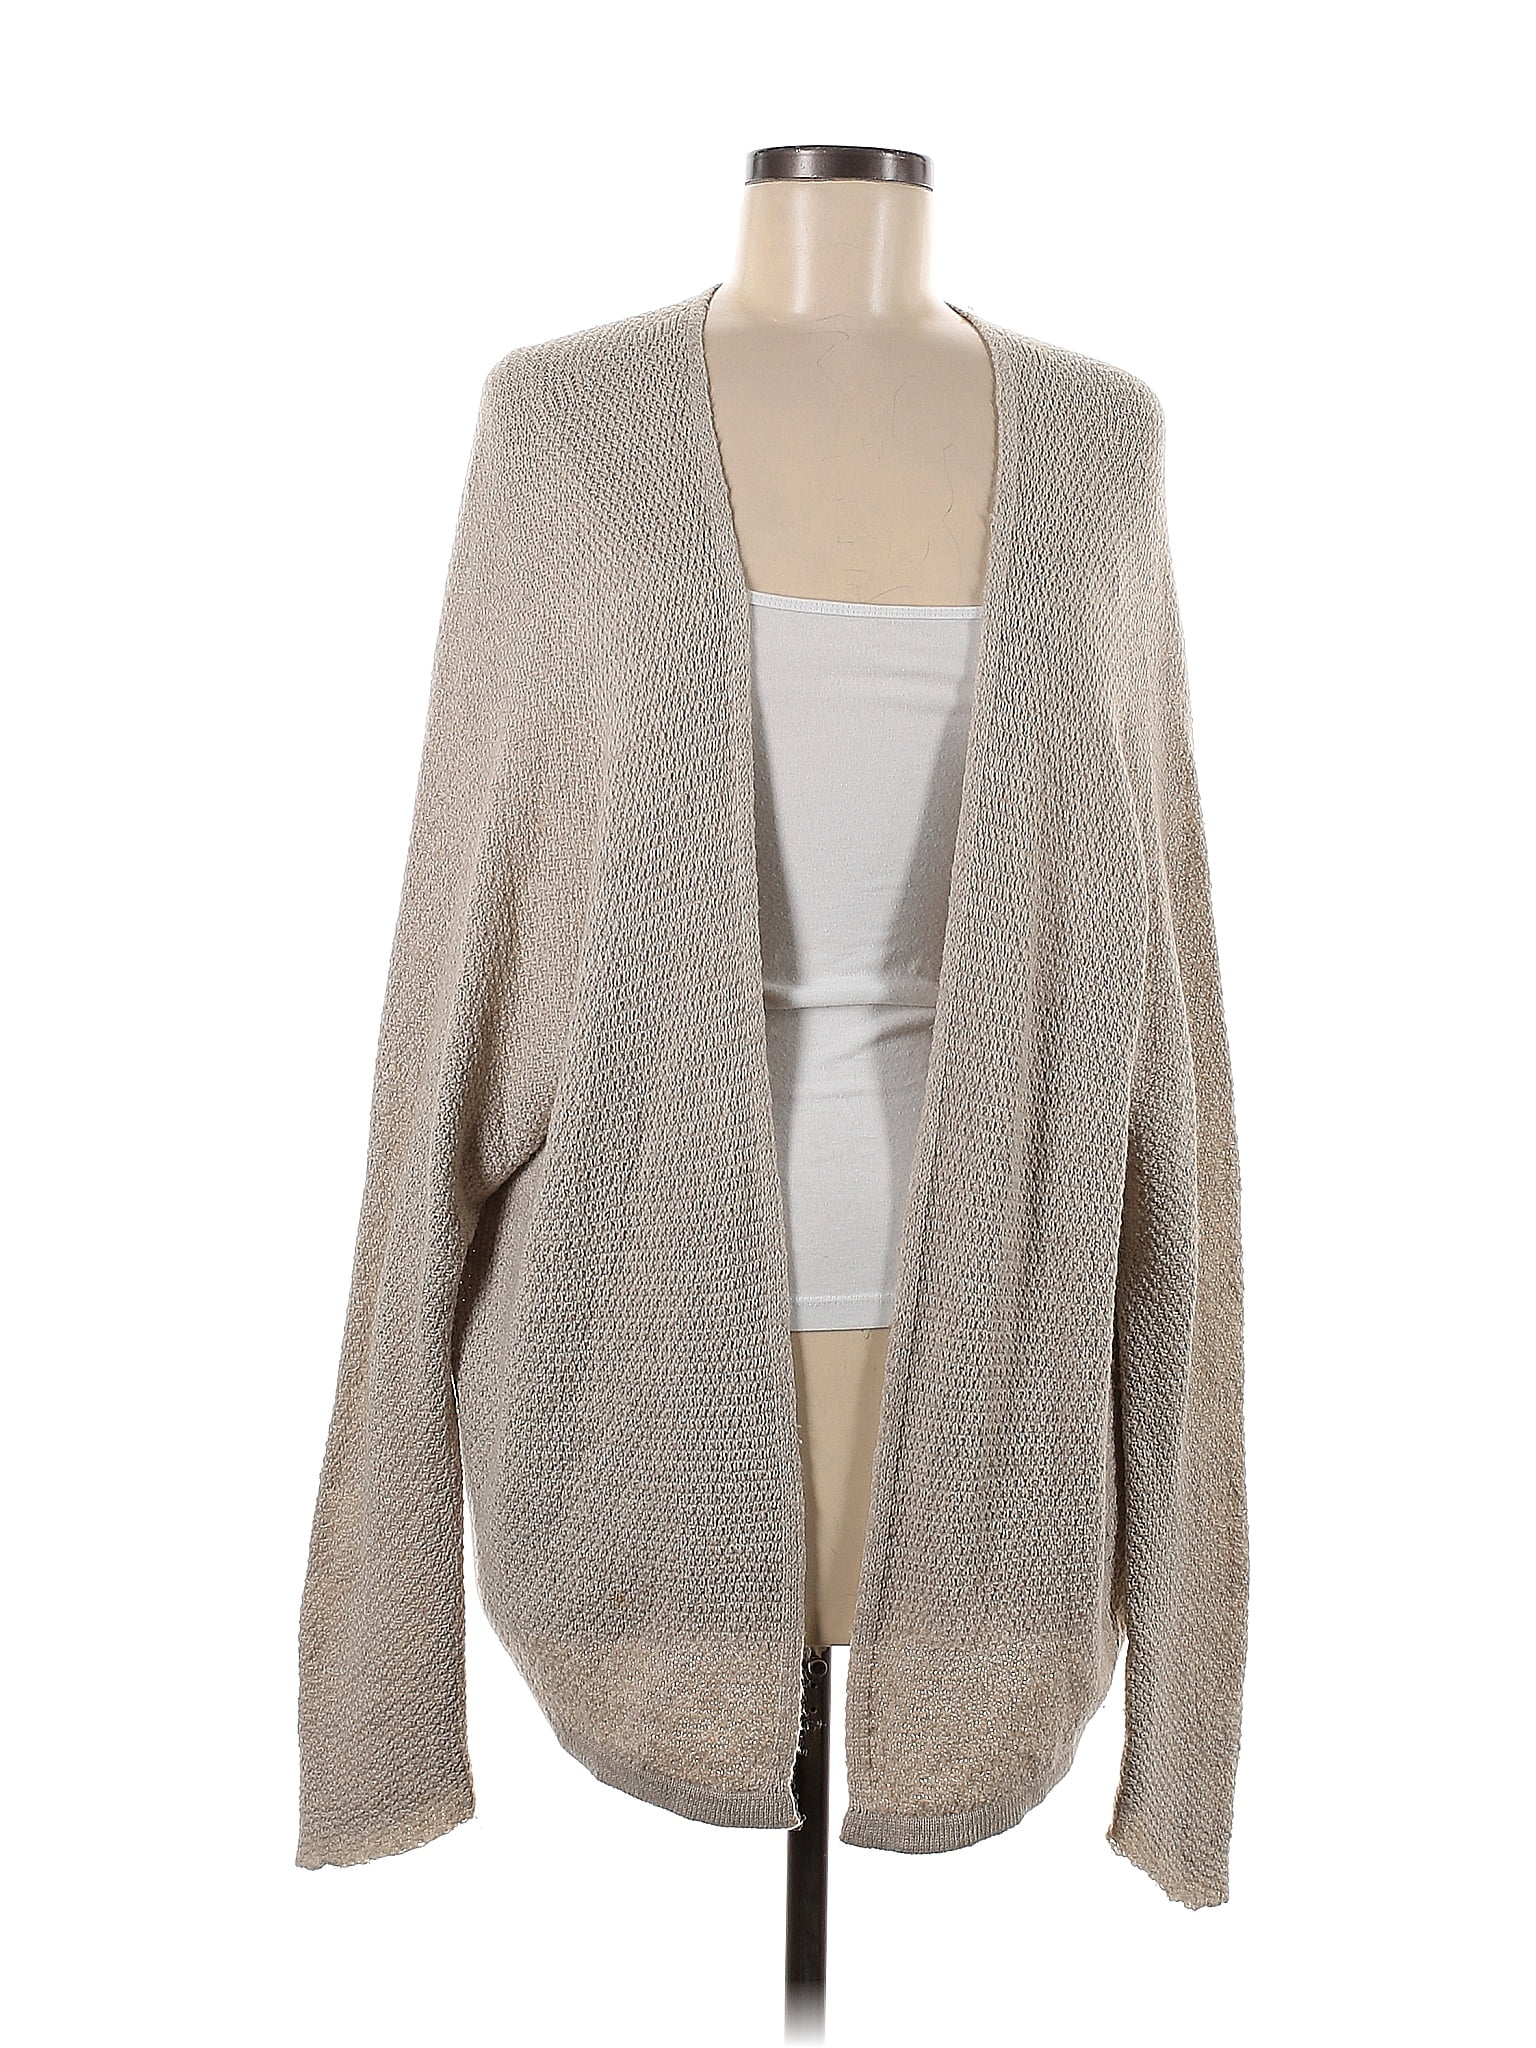 Brandy Melville Color Block Solid Tan Cardigan One Size - 50% off